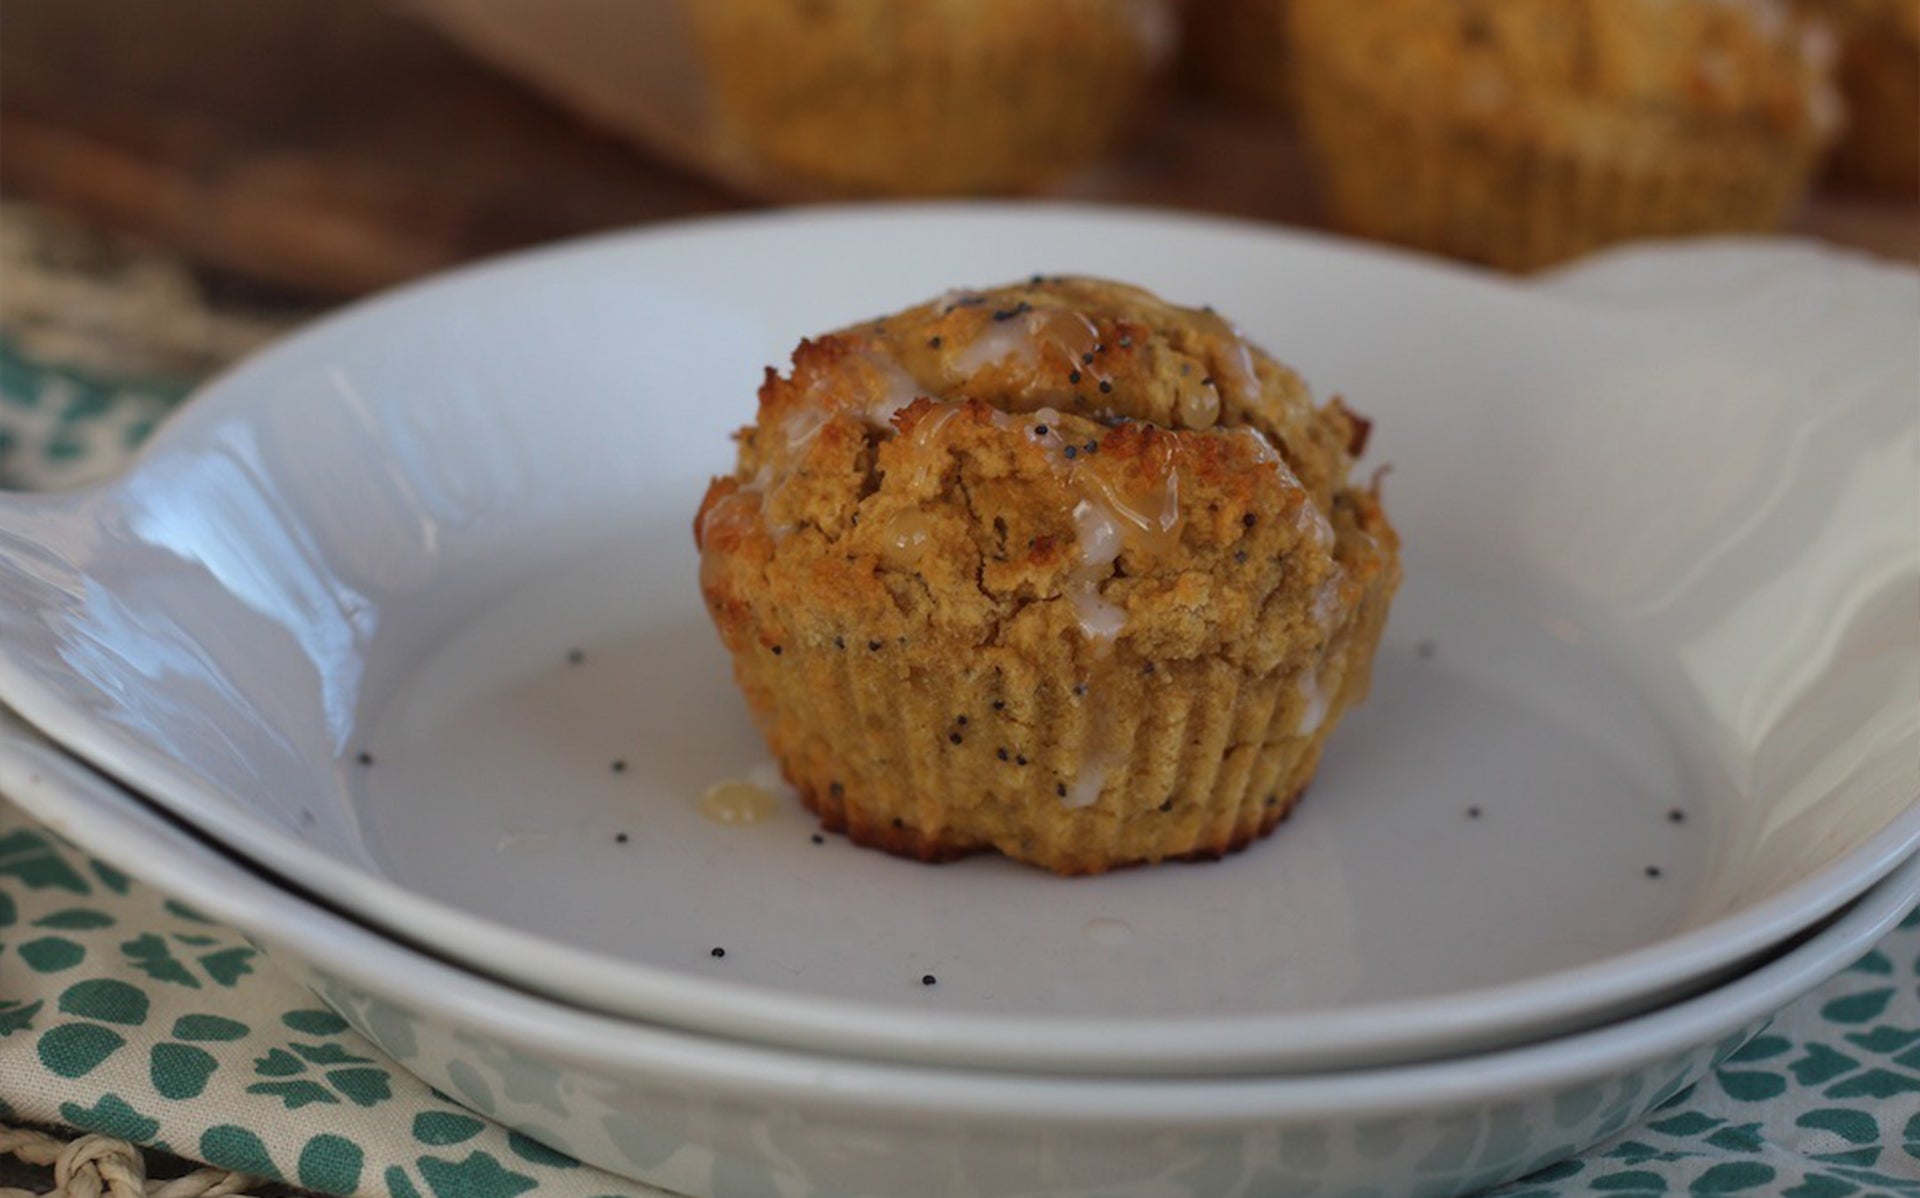 Keeping It Short And Sweet: Just Like This Muffin Recipe!